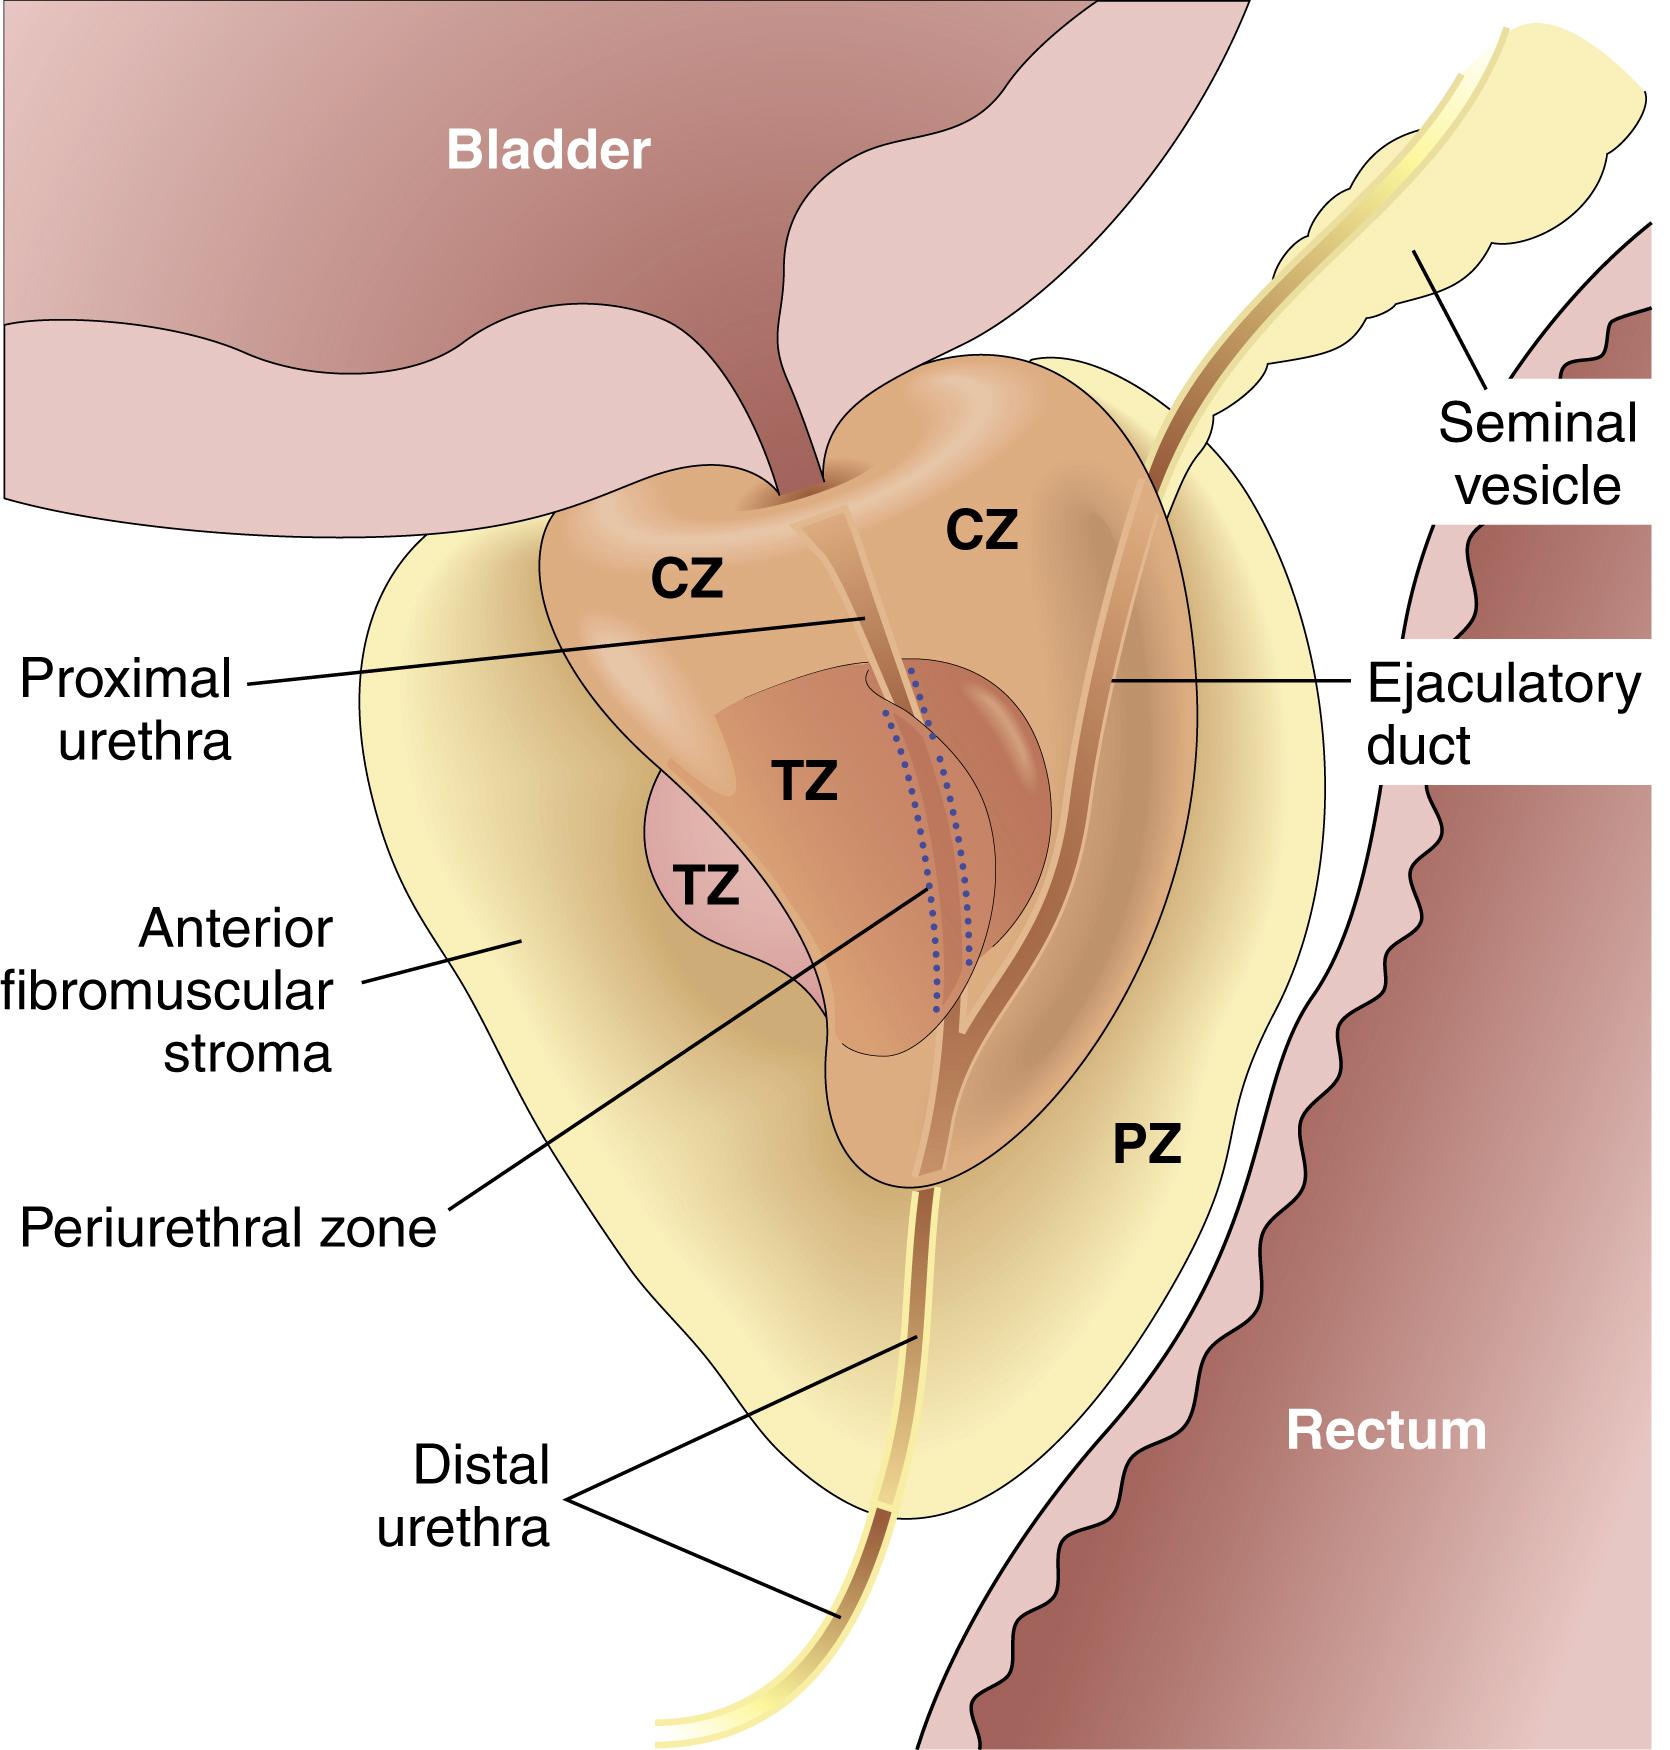 FIG. 16.10, Adult prostate. The normal prostate contains several distinct regions, including a central zone (CZ), a peripheral zone (PZ), a transitional zone (TZ), and a periurethral zone. Most carcinomas arise from the peripheral glands of the organ, whereas nodular hyperplasia arises from more centrally situated glands.